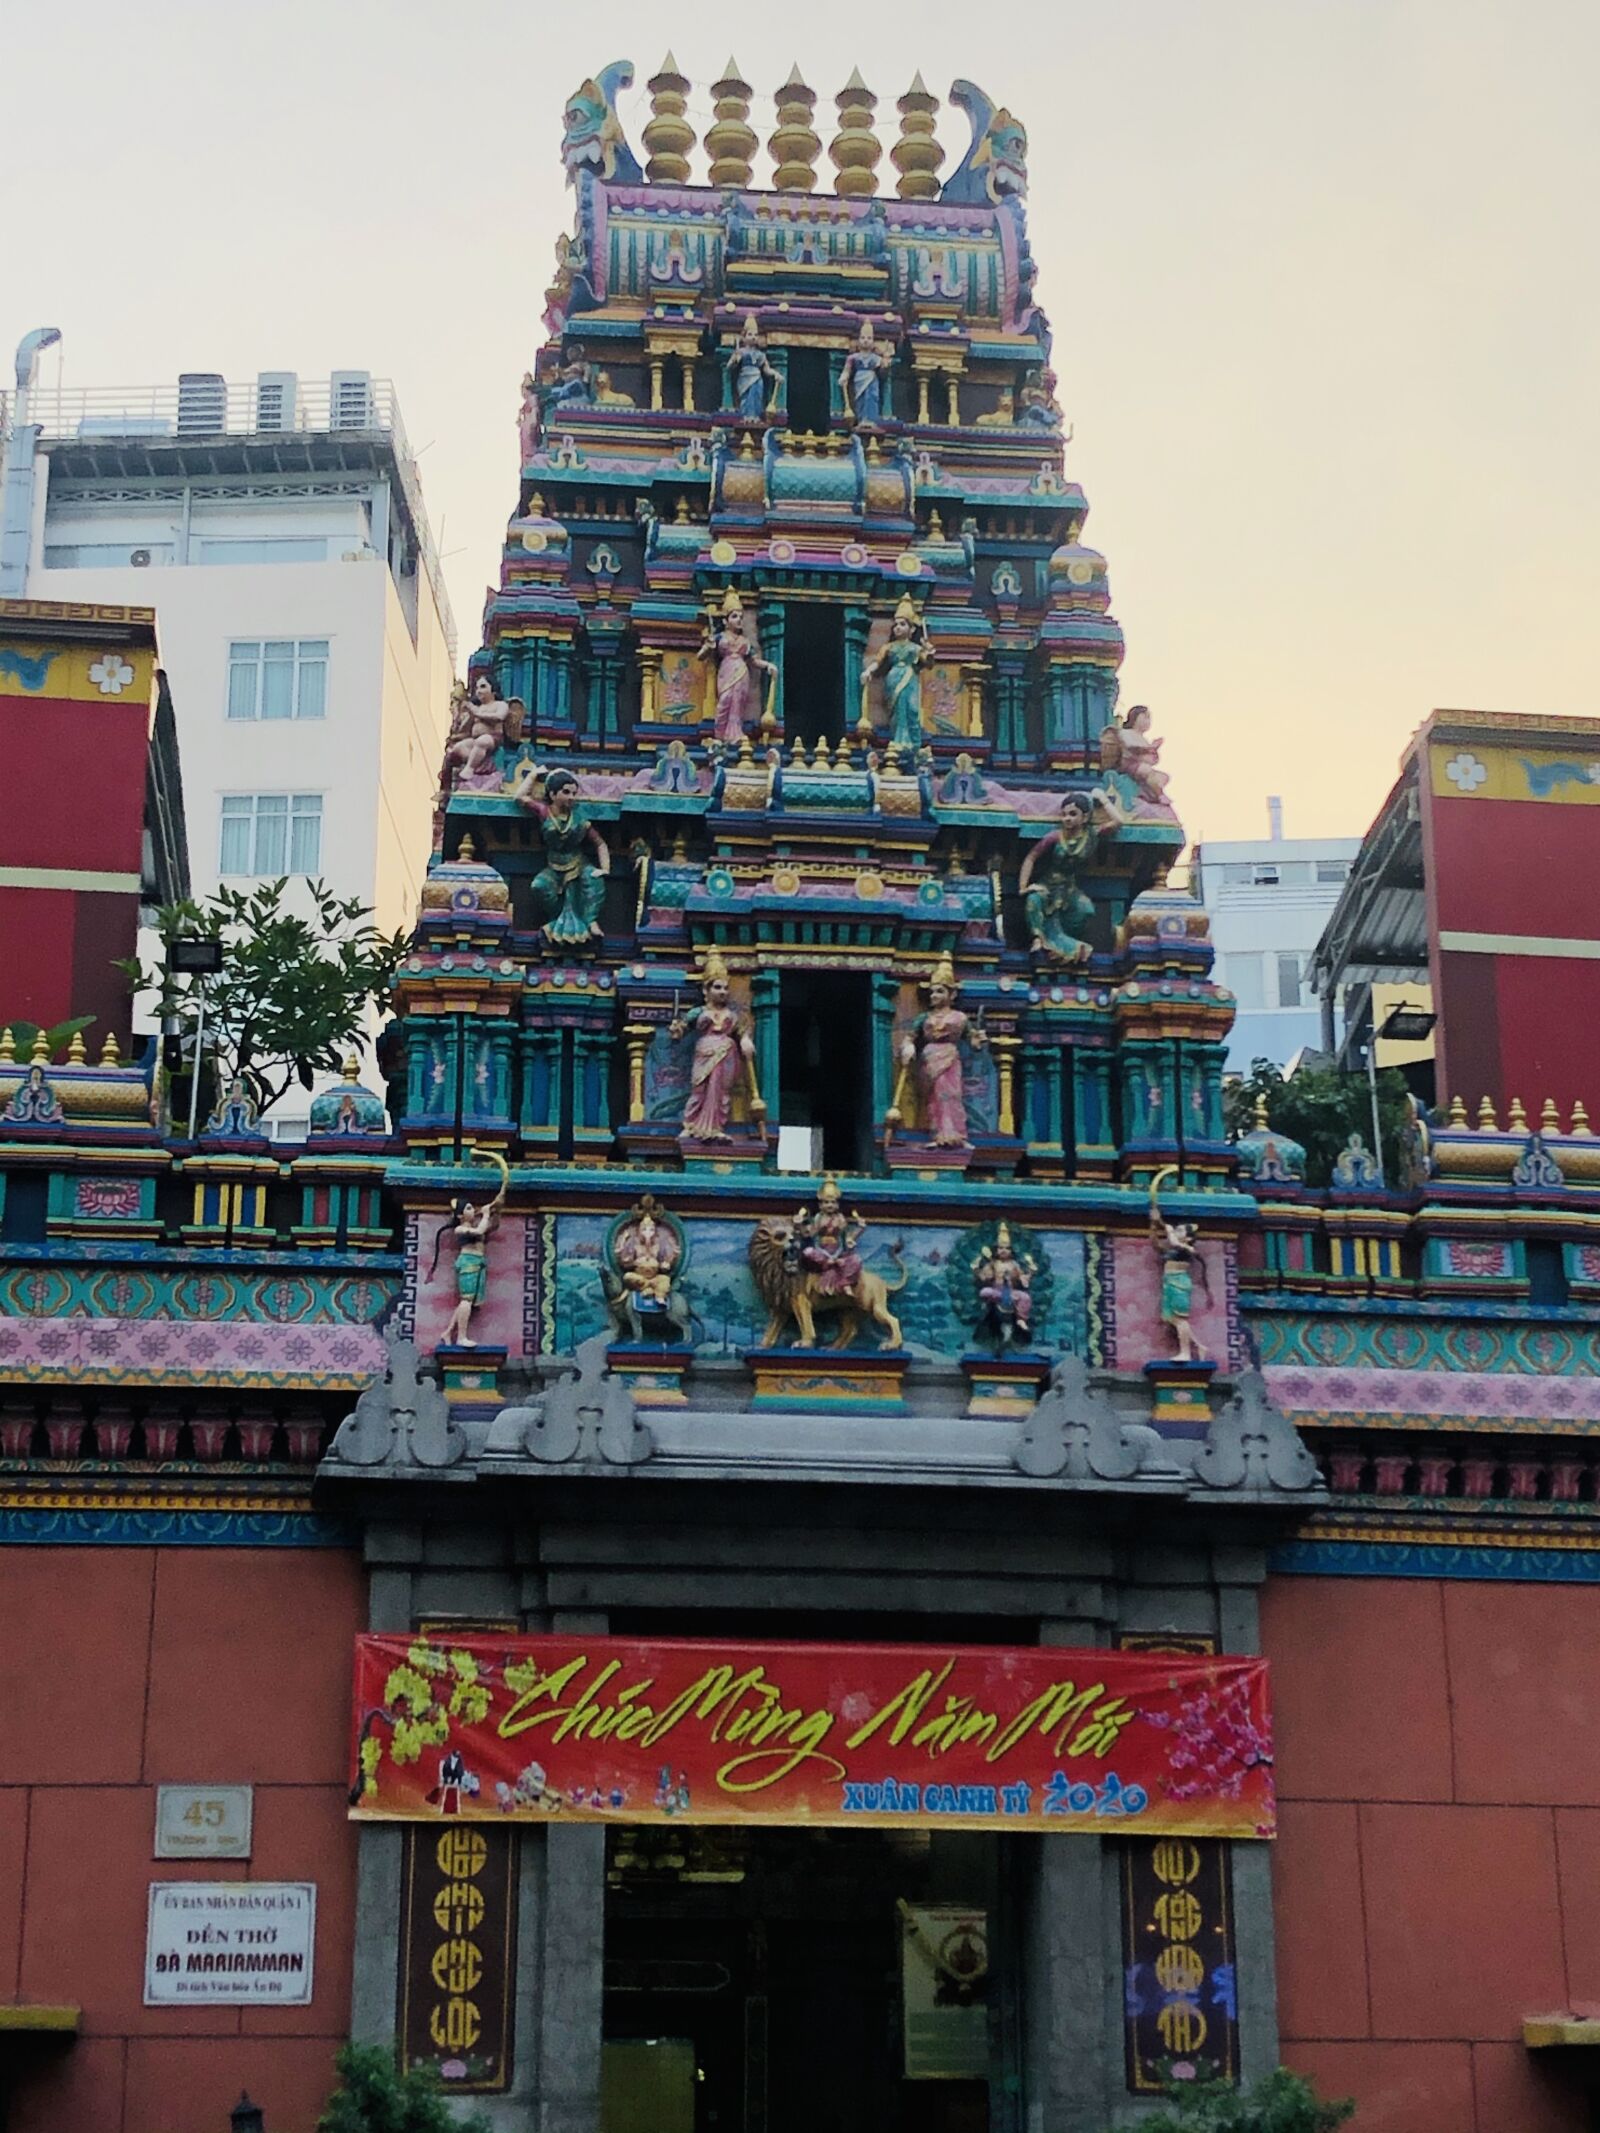 Apple iPhone 8 + iPhone 8 back camera 3.99mm f/1.8 sample photo. Vietnam, the mariamman temple photography